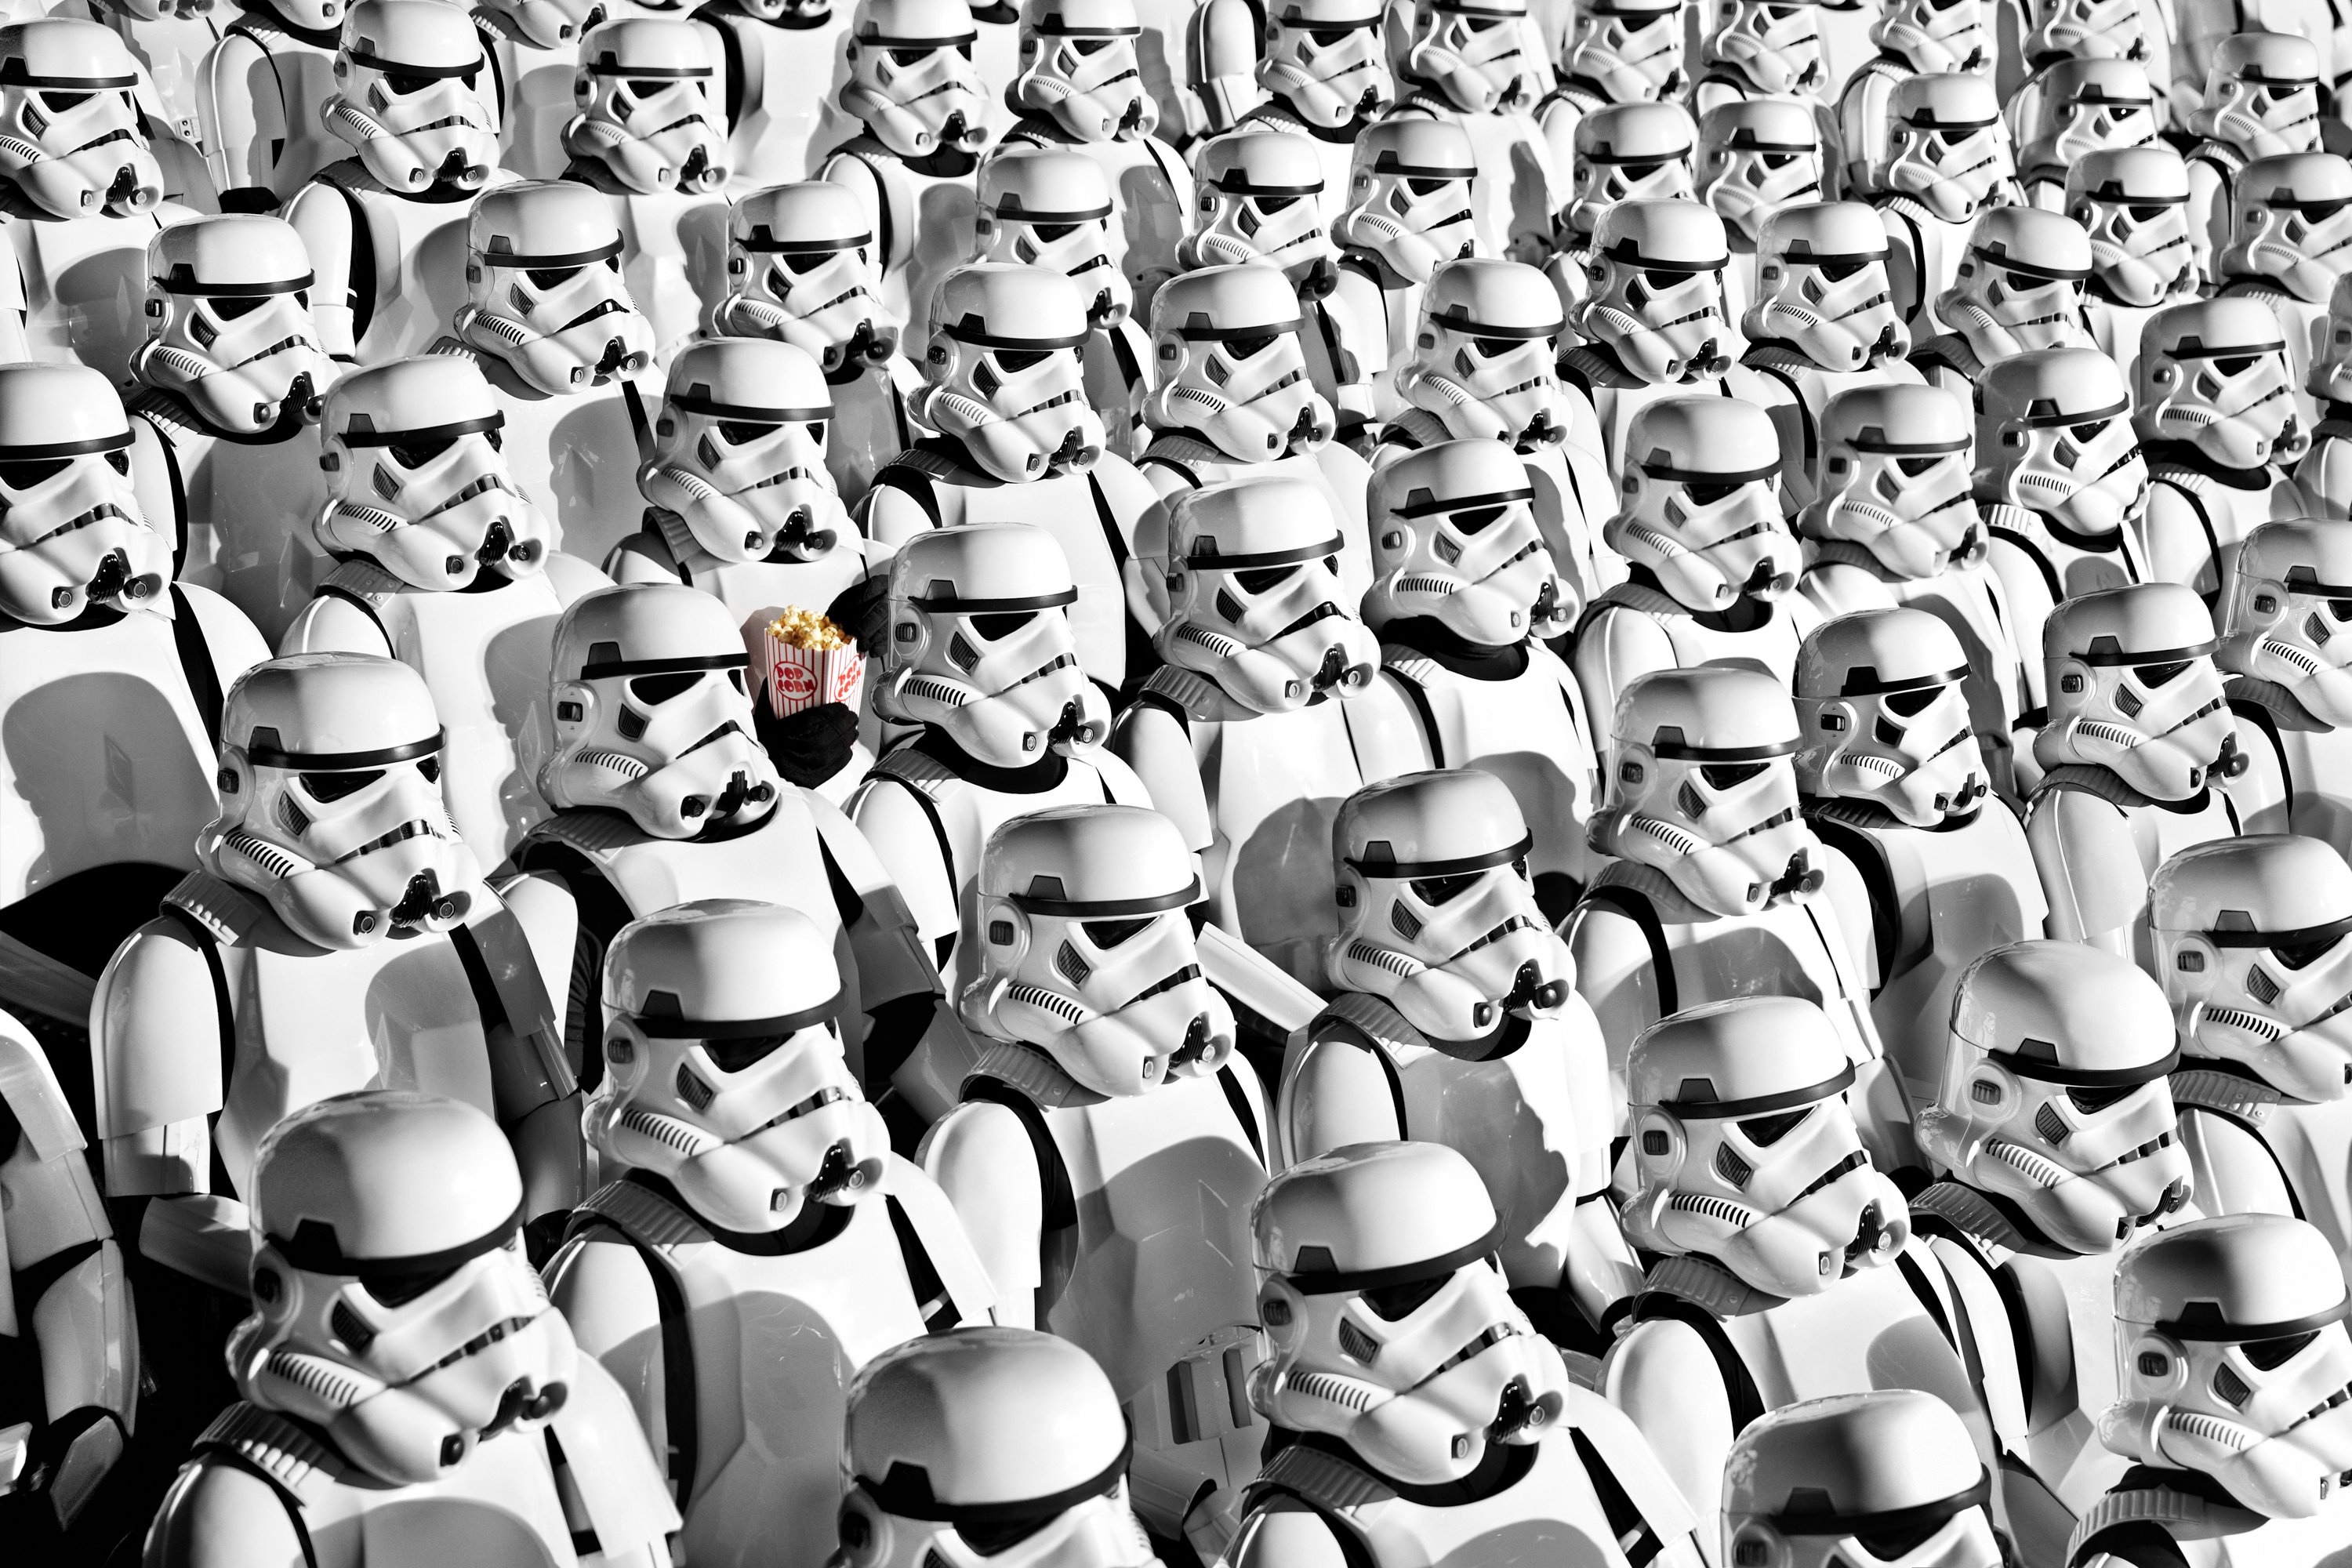 "Stormtroopers at the CInema" by Art Streiber